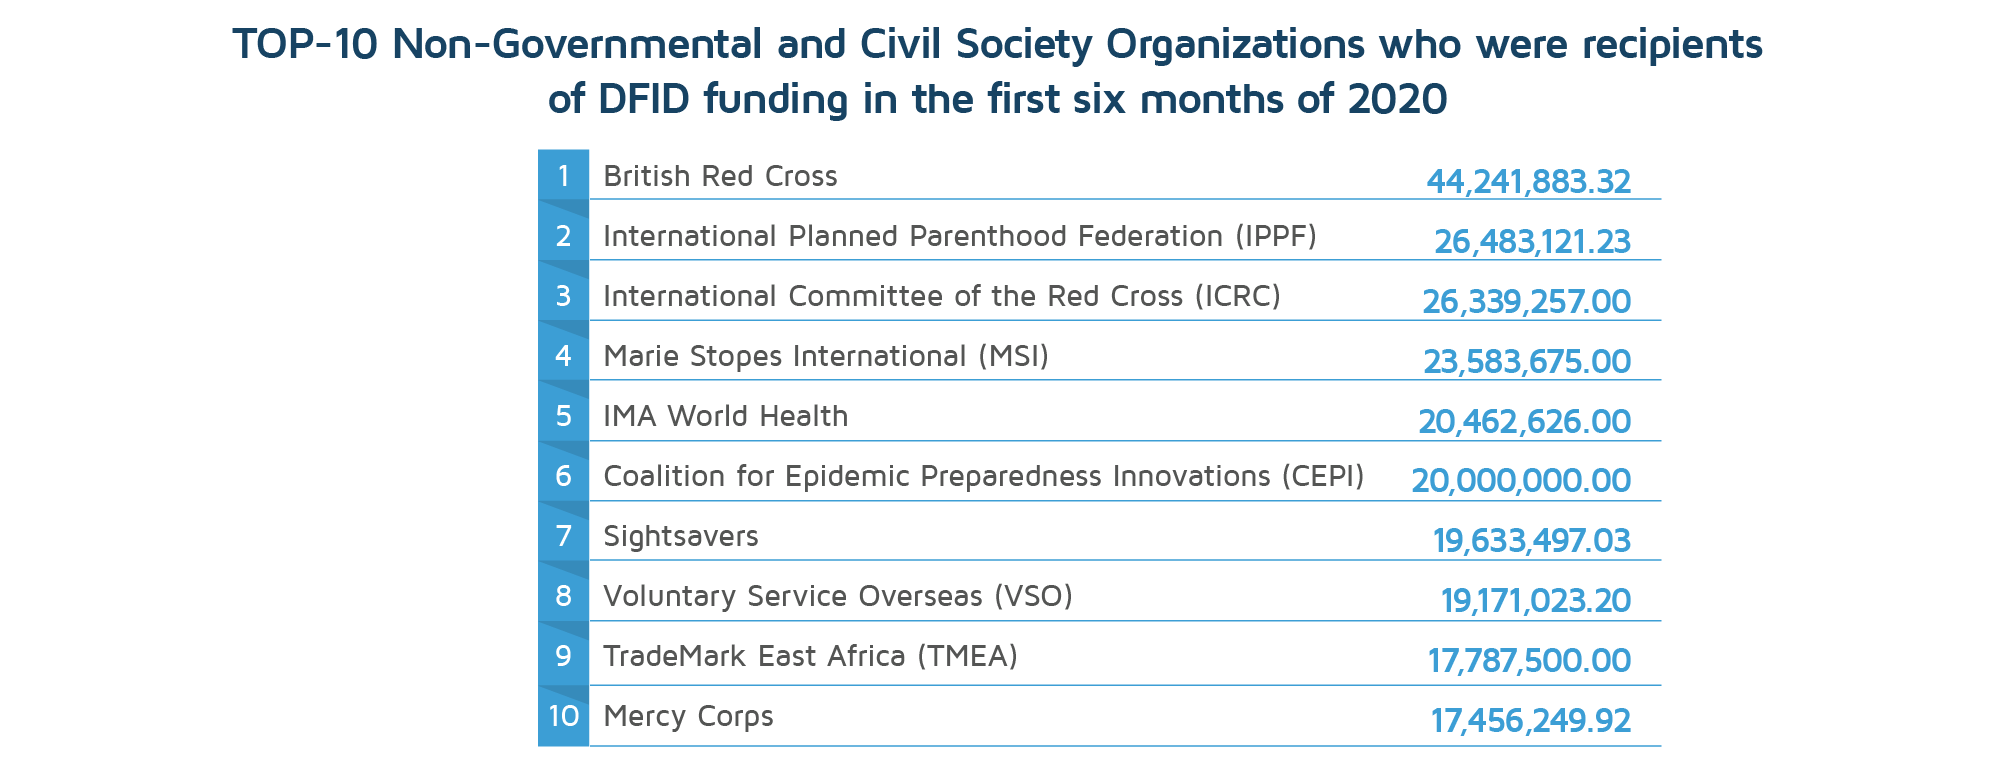 TOP-10 NGOs and CSOs reciepients of DFID funding in the first six months of 2020